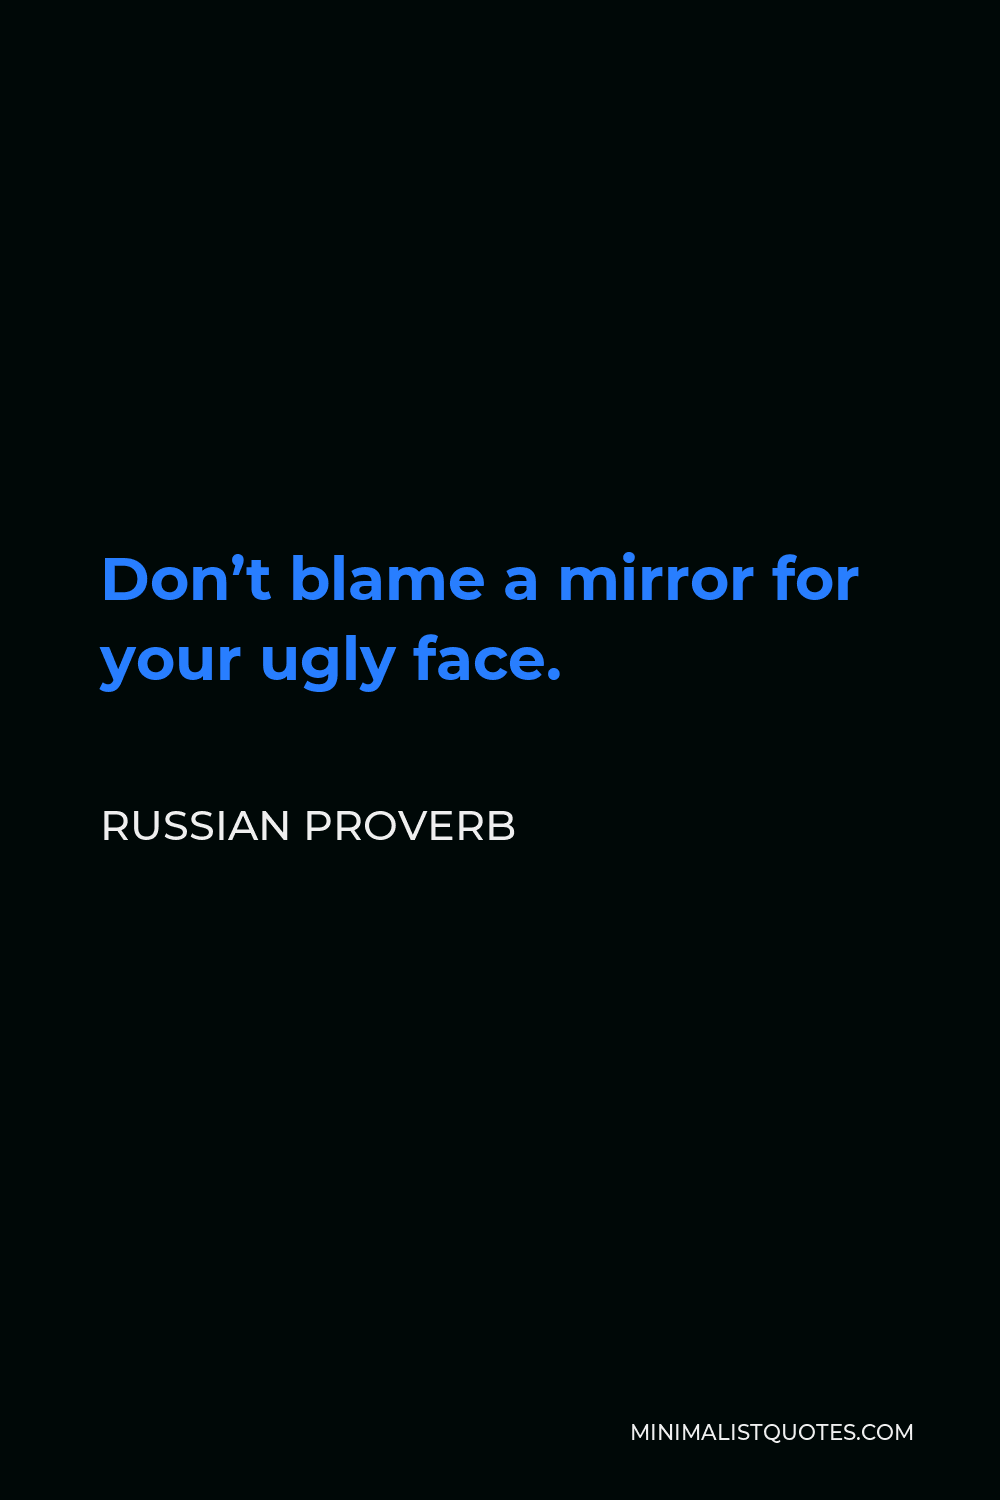 Russian Proverb Quote - Don’t blame a mirror for your ugly face.